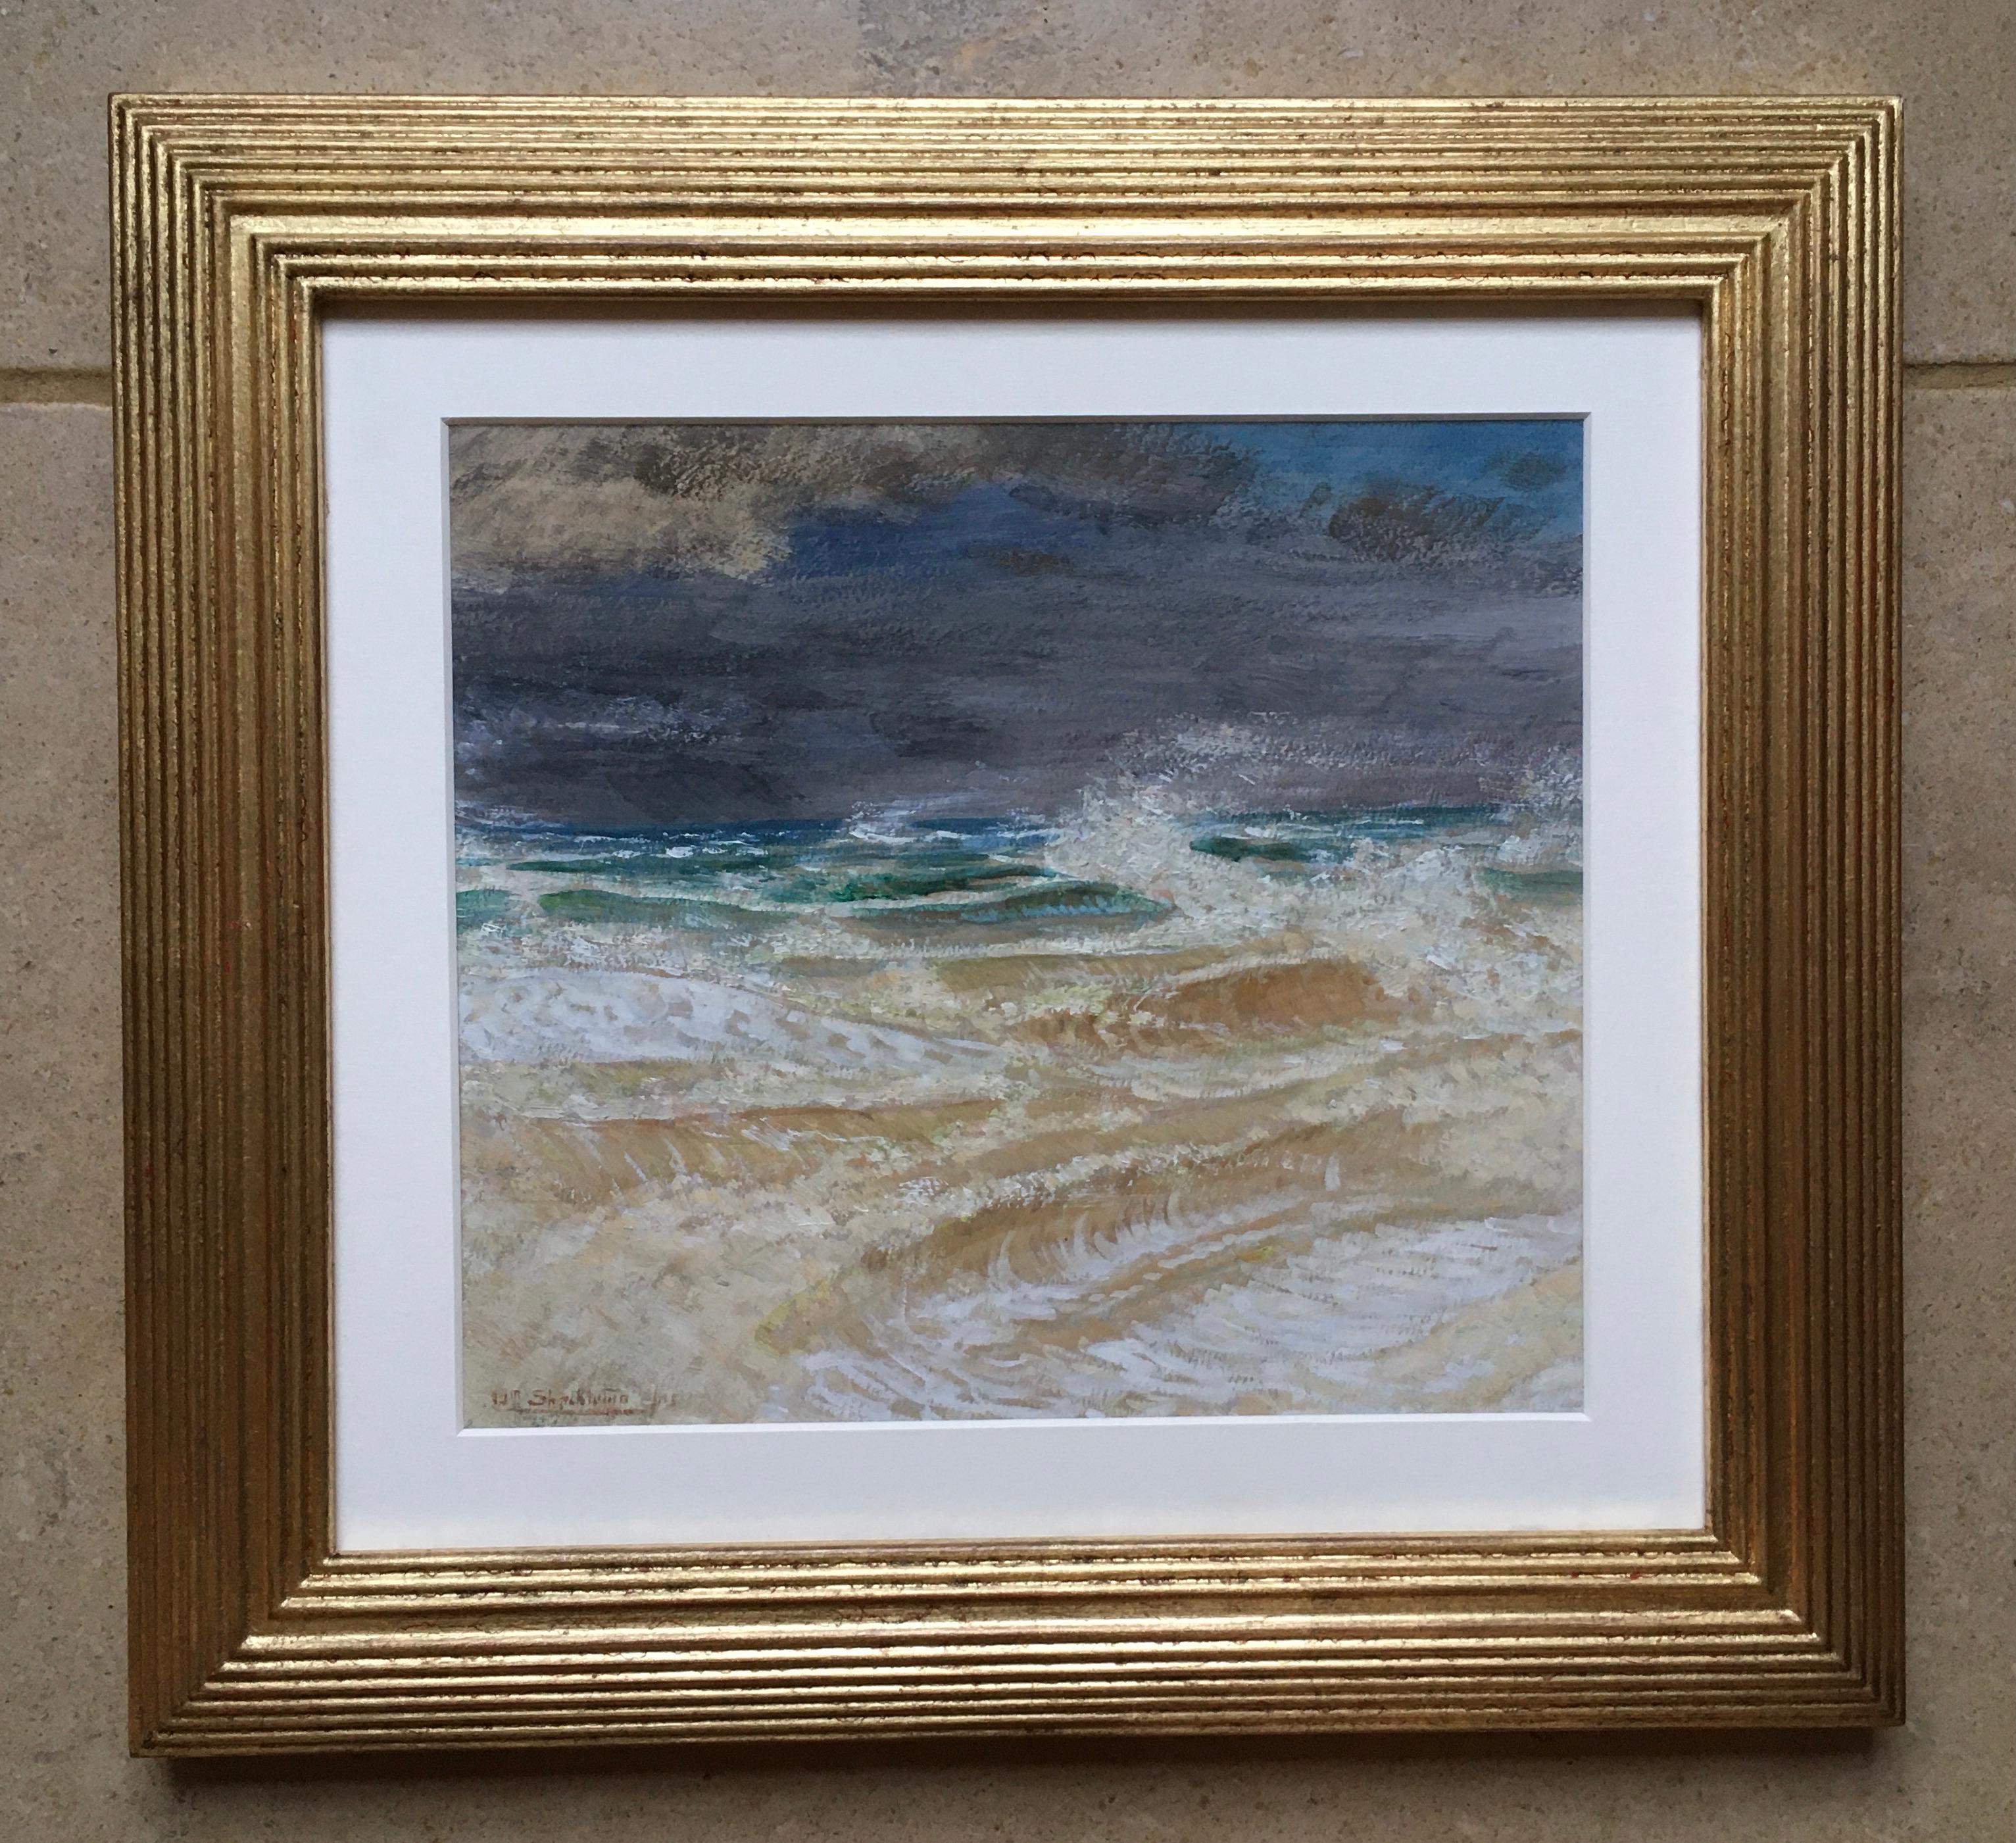 WILLIAM SHACKLETON, NEAC
(1872-1933)

The Storm

Signed and indistinctly dated
Oil on paper

23 by 25.5 cm., 9 by 10 in.
(frame size 37 by 40.5 cm., 14 ½ by 16 in.)

Shackleton was born in Bradford, the son of a paper manufacturer and merchant.  He